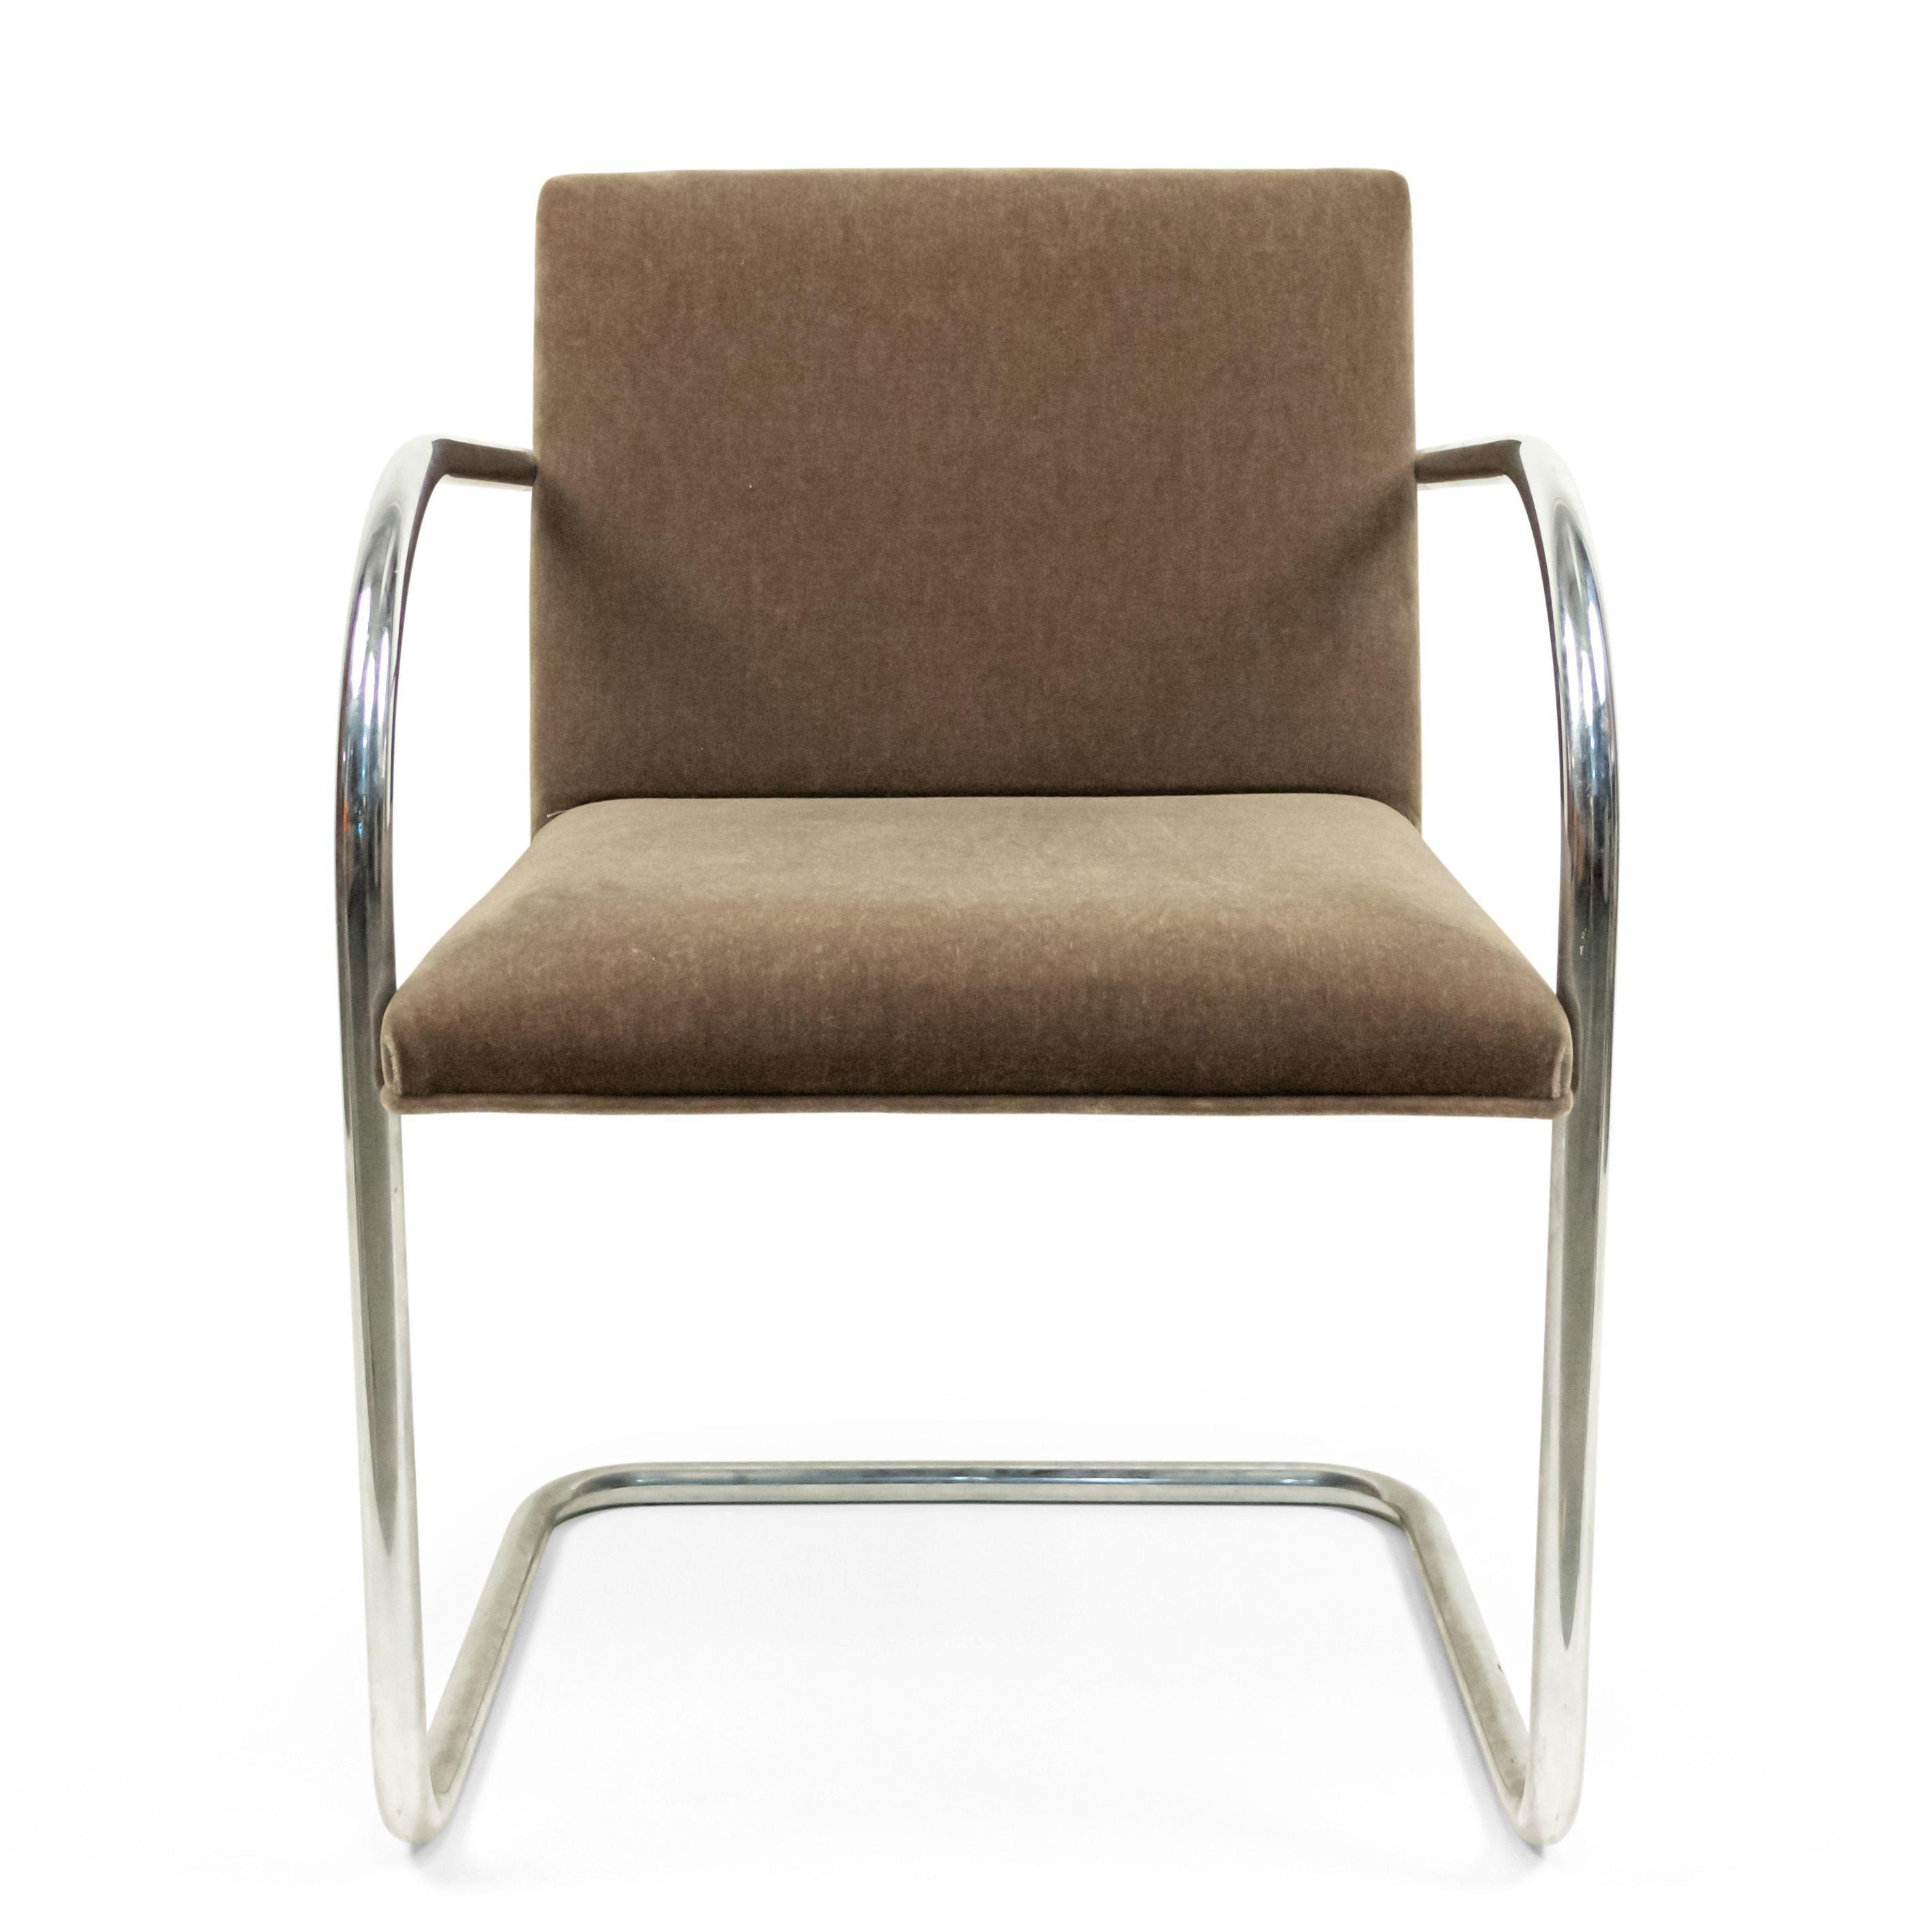 3 American post-war design chrome framed armchairs with various shades of grey upholstered seats with a square back (style of Mies van de Rohe-Gordon Chair Co) (priced each).